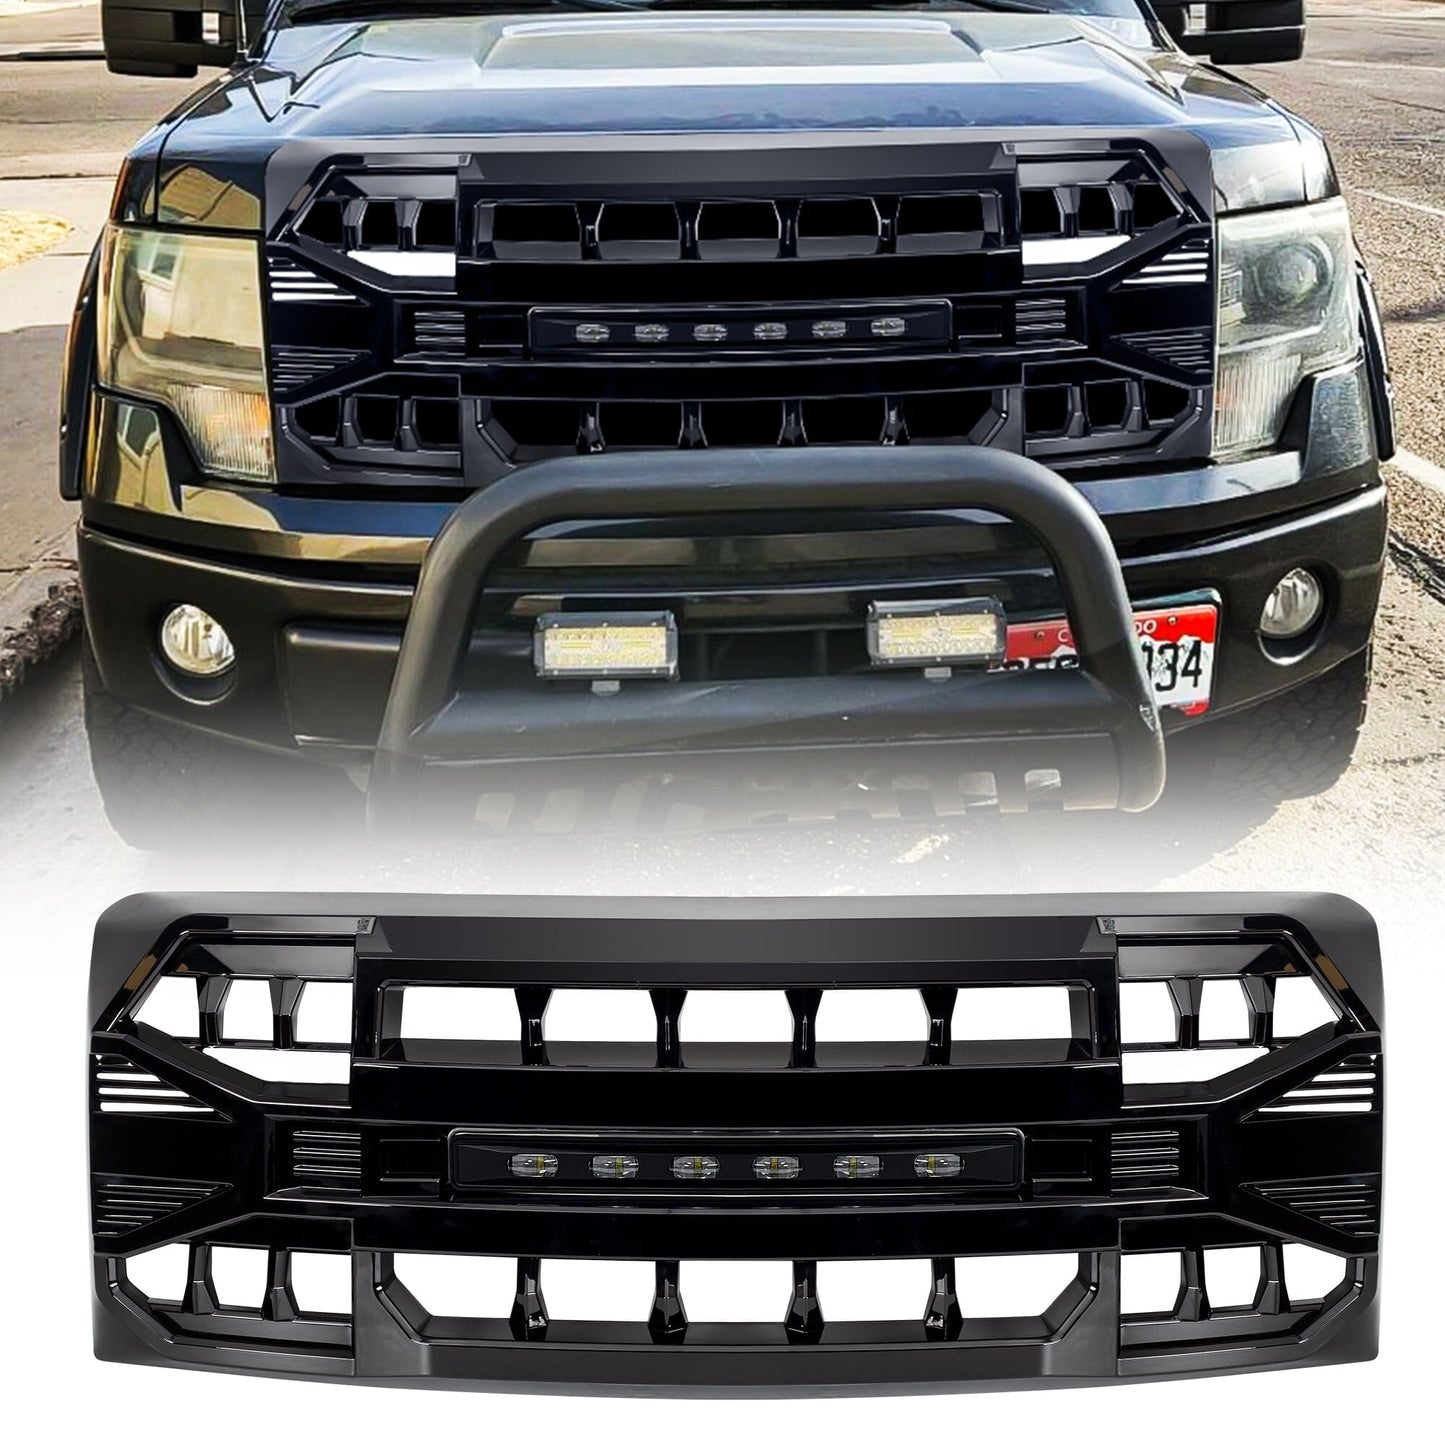 Armor Grille W/Off-Road Lights - Glossy Black For 2009-2014 Ford F150|Amoffroad